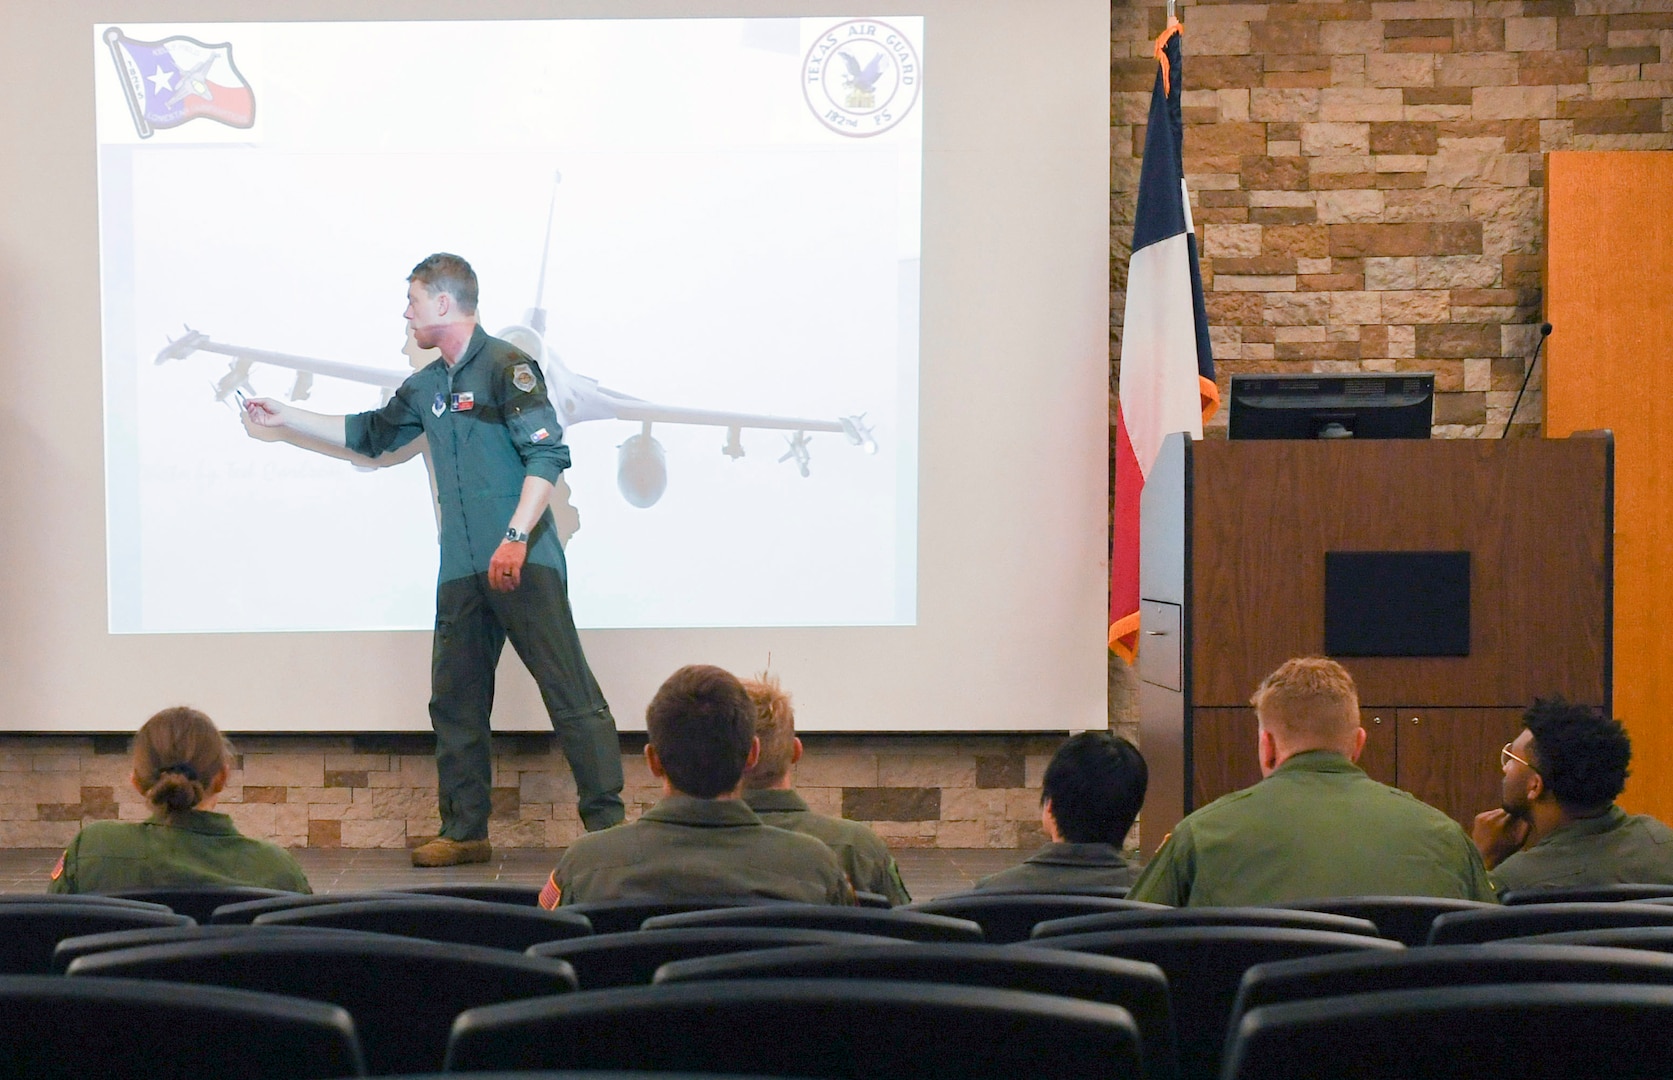 Cadets from the U.S. Air Force Academy visit the 149th Fighter Wing to see what being a Gunfighter is all about at Joint Base San Antonio-Lackland July 26.